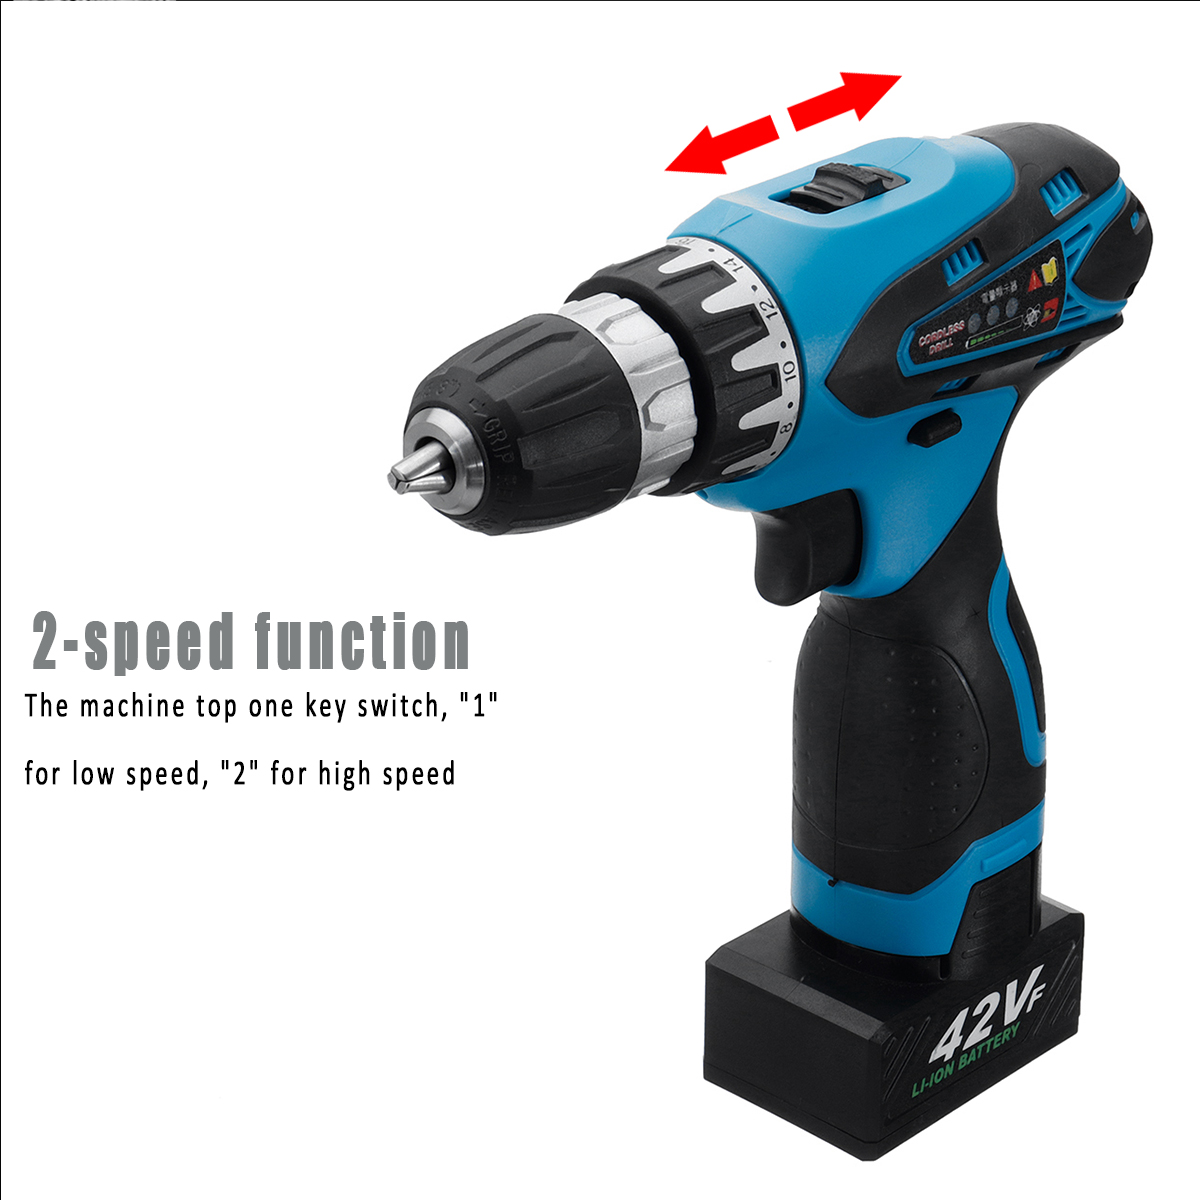 42V-9000mAh-Electric-Cordless-Drill-Driver-LED-2-Speed-Screwdriver-W-1-or-2-Li-Ion-Battery-1451594-3